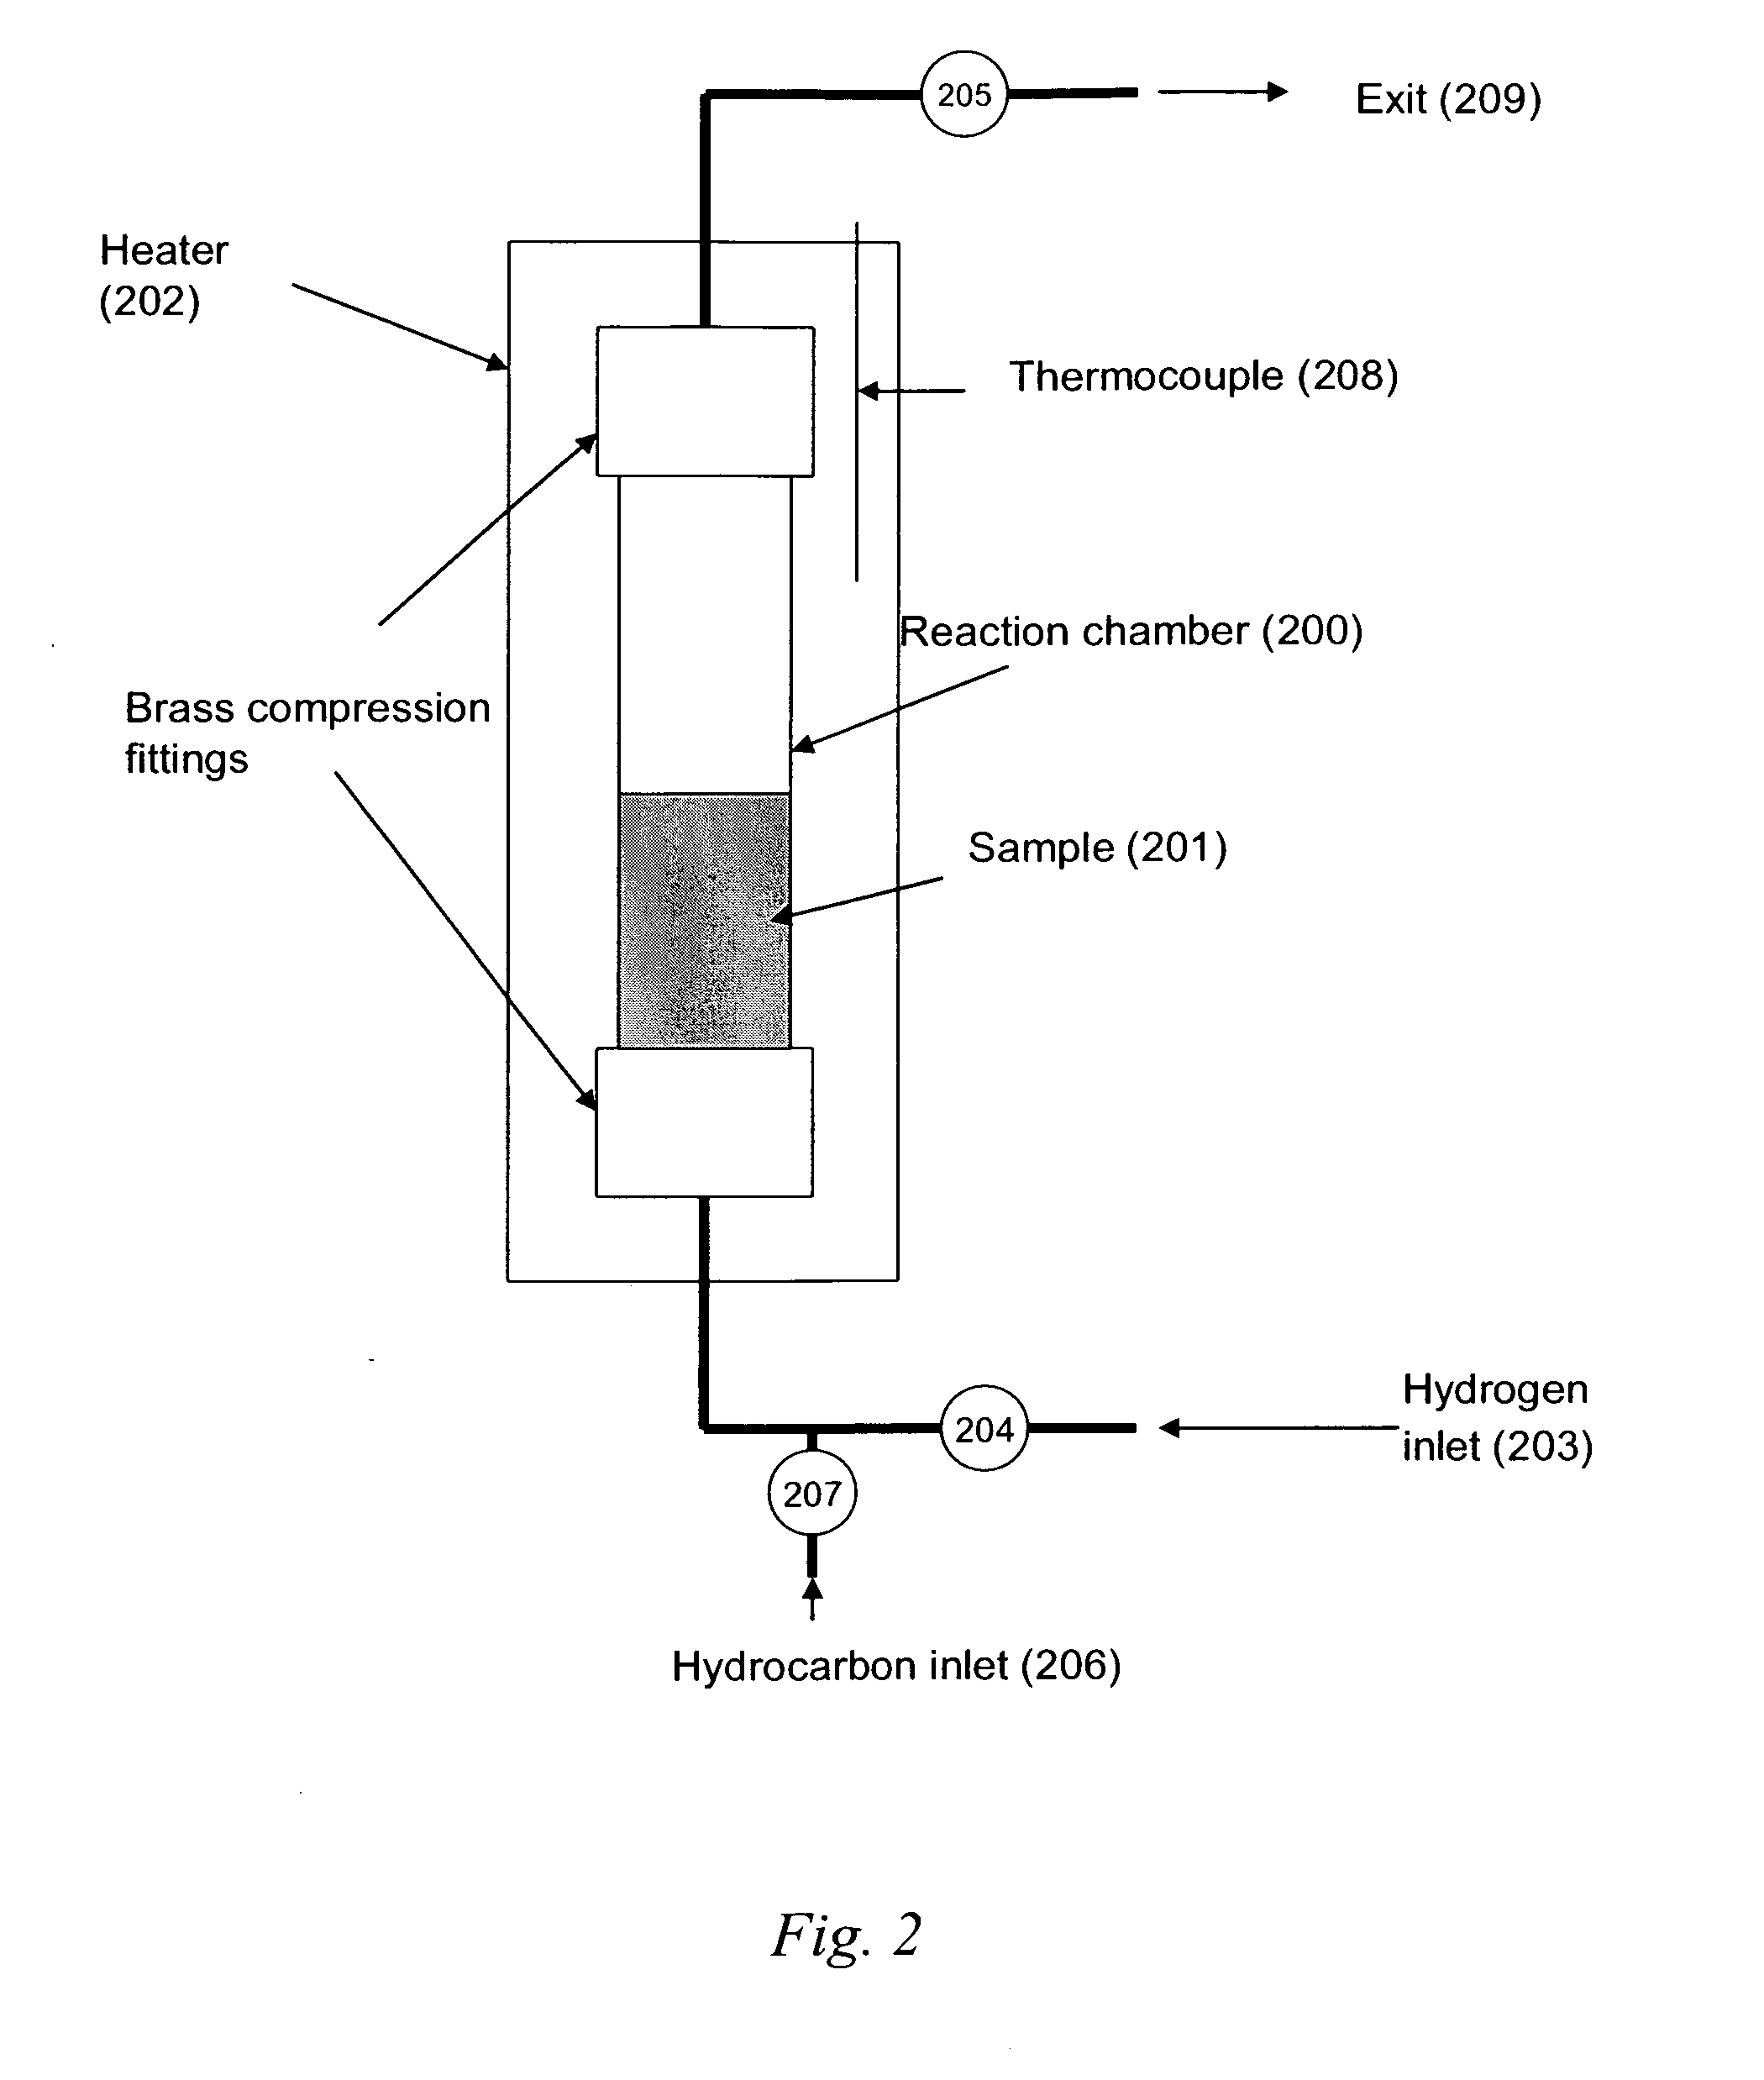 Novel well logging method for the determination of catalytic activity